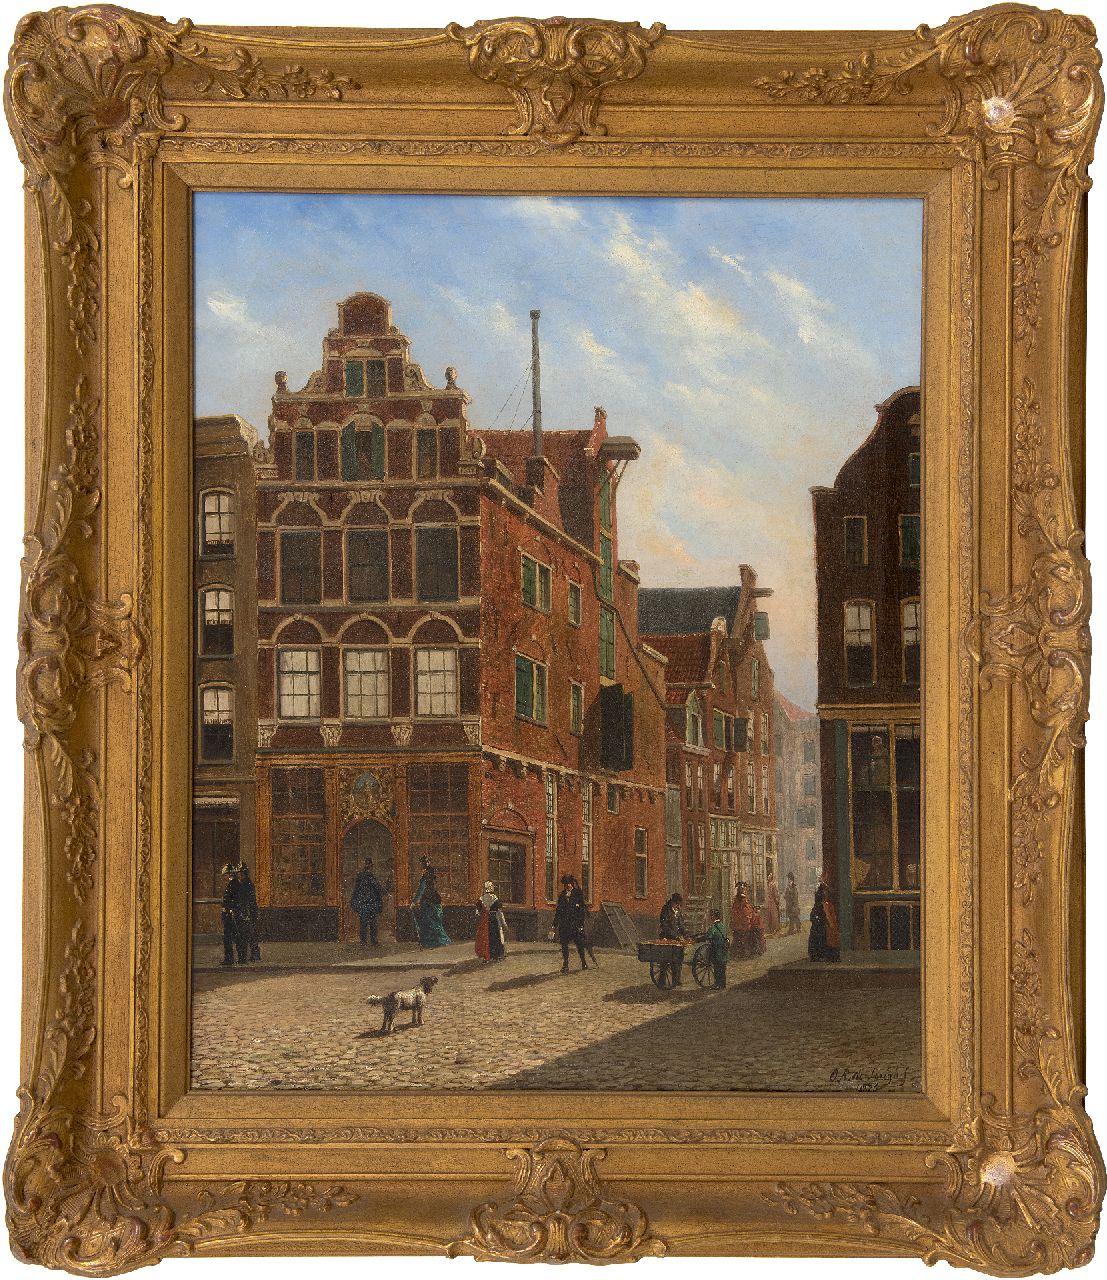 Jongh O.R. de | Oene Romkes de Jongh | Paintings offered for sale | View in a Dutch town, oil on canvas 54.0 x 44.0 cm, signed l.r. and dated 1876